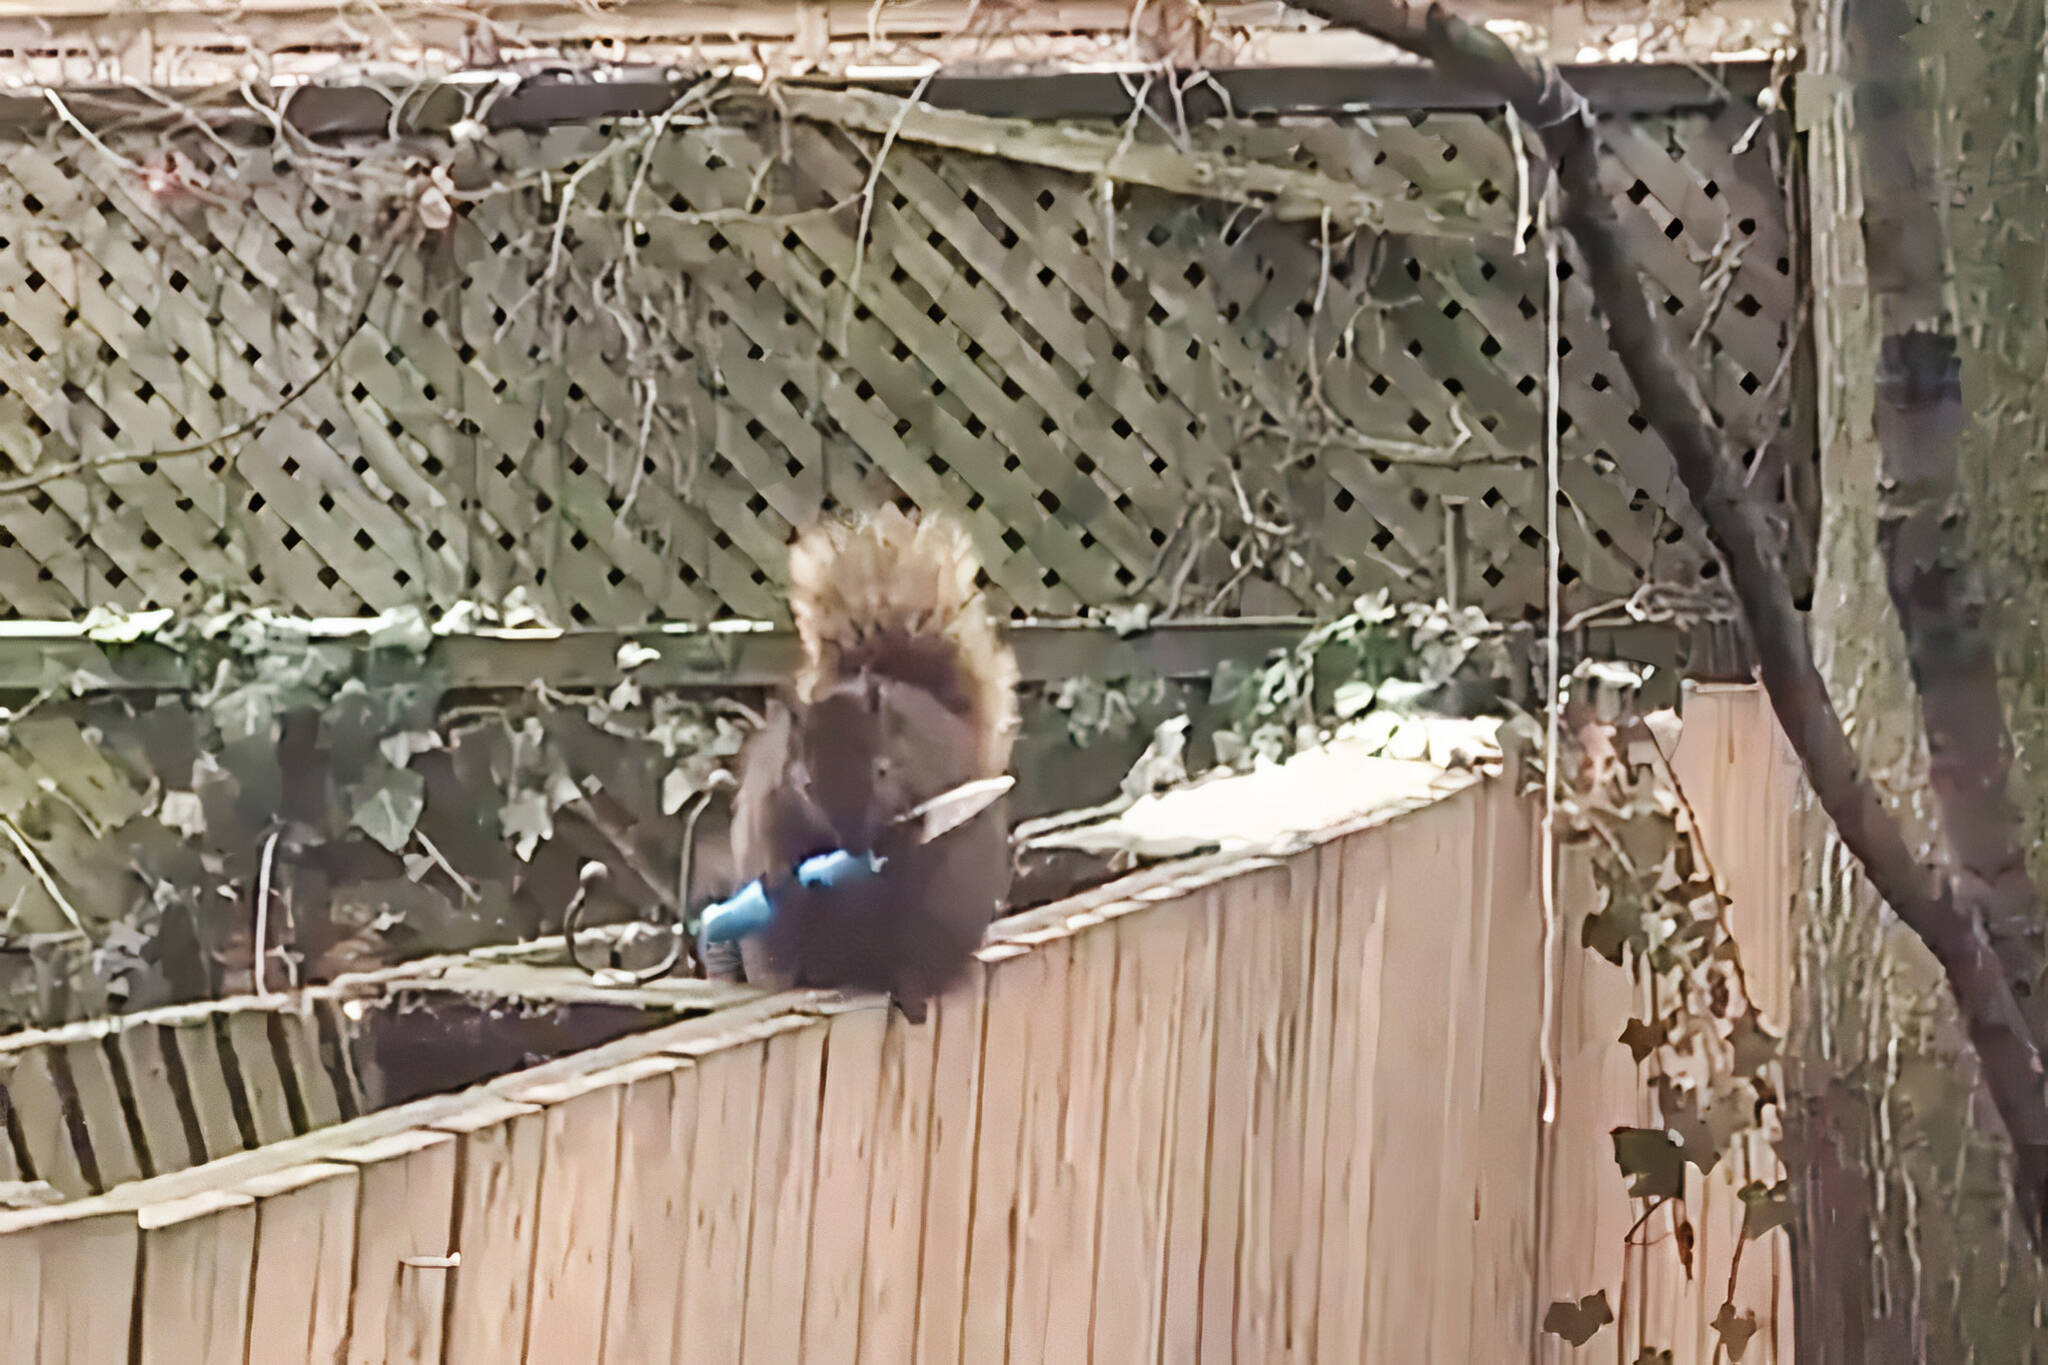 Knife-wielding squirrel captured on camera in Toronto